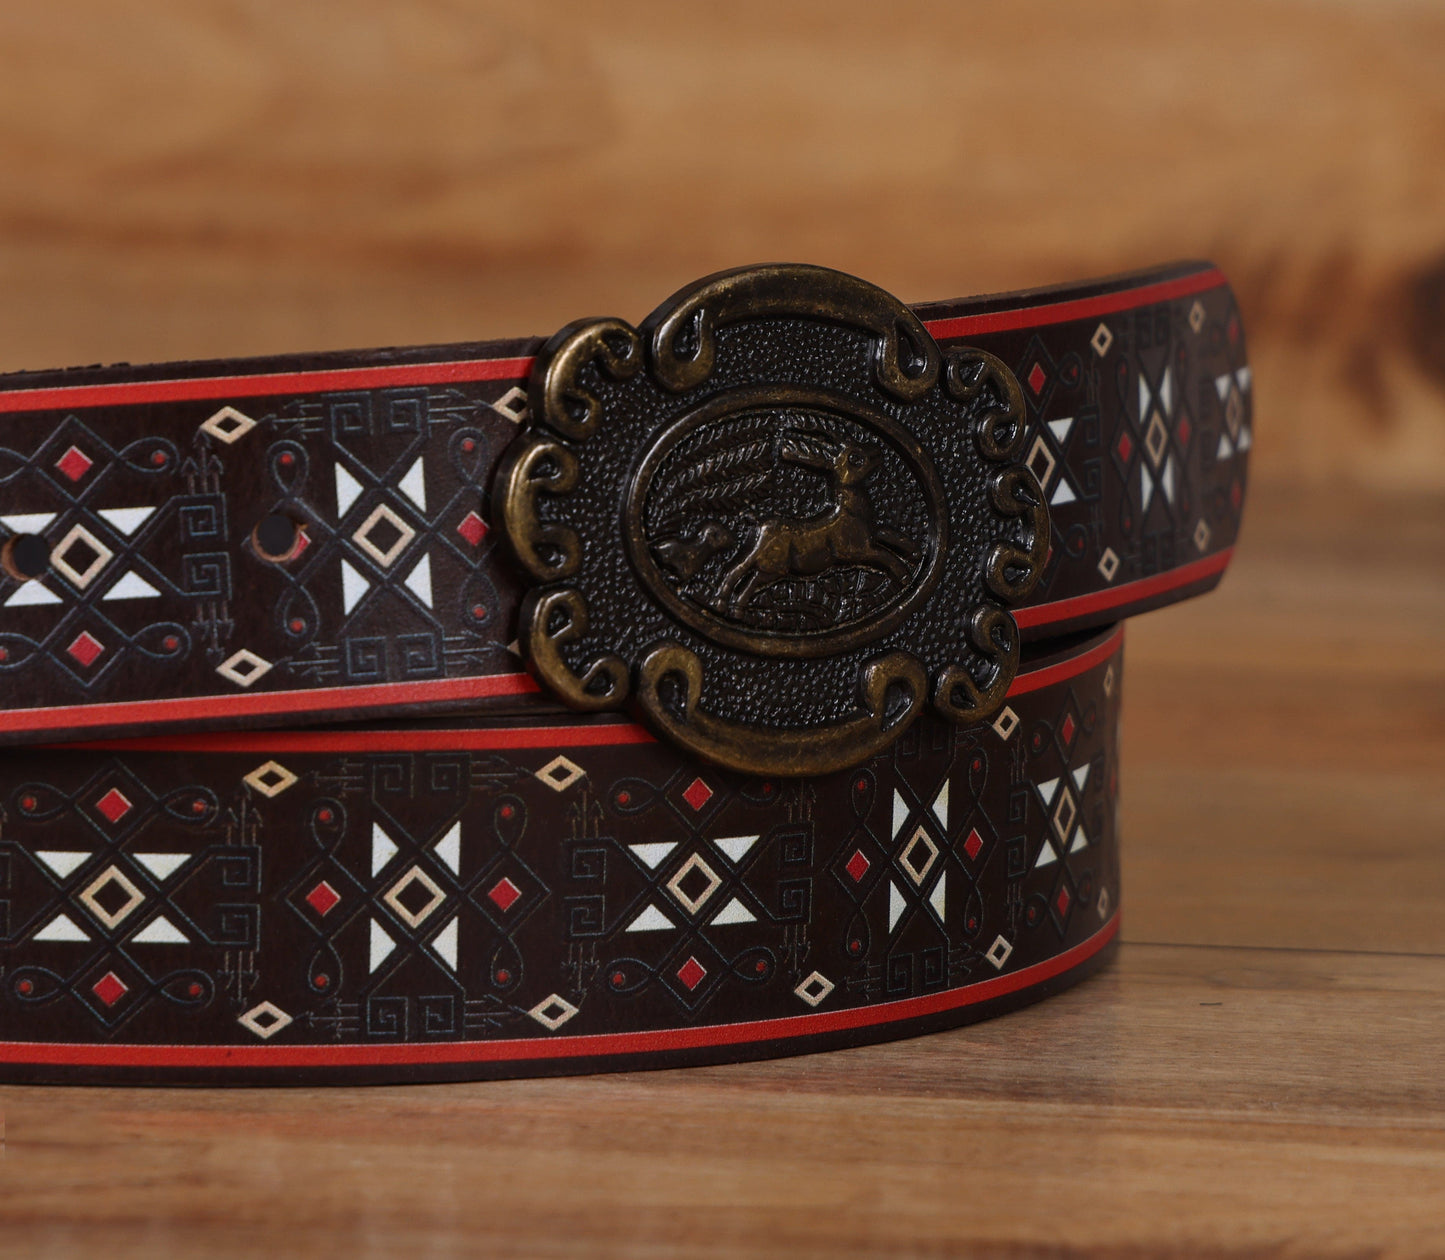 "Customized Chic: Elevate Your Look with Leather Printing Belts" Art: LB-818